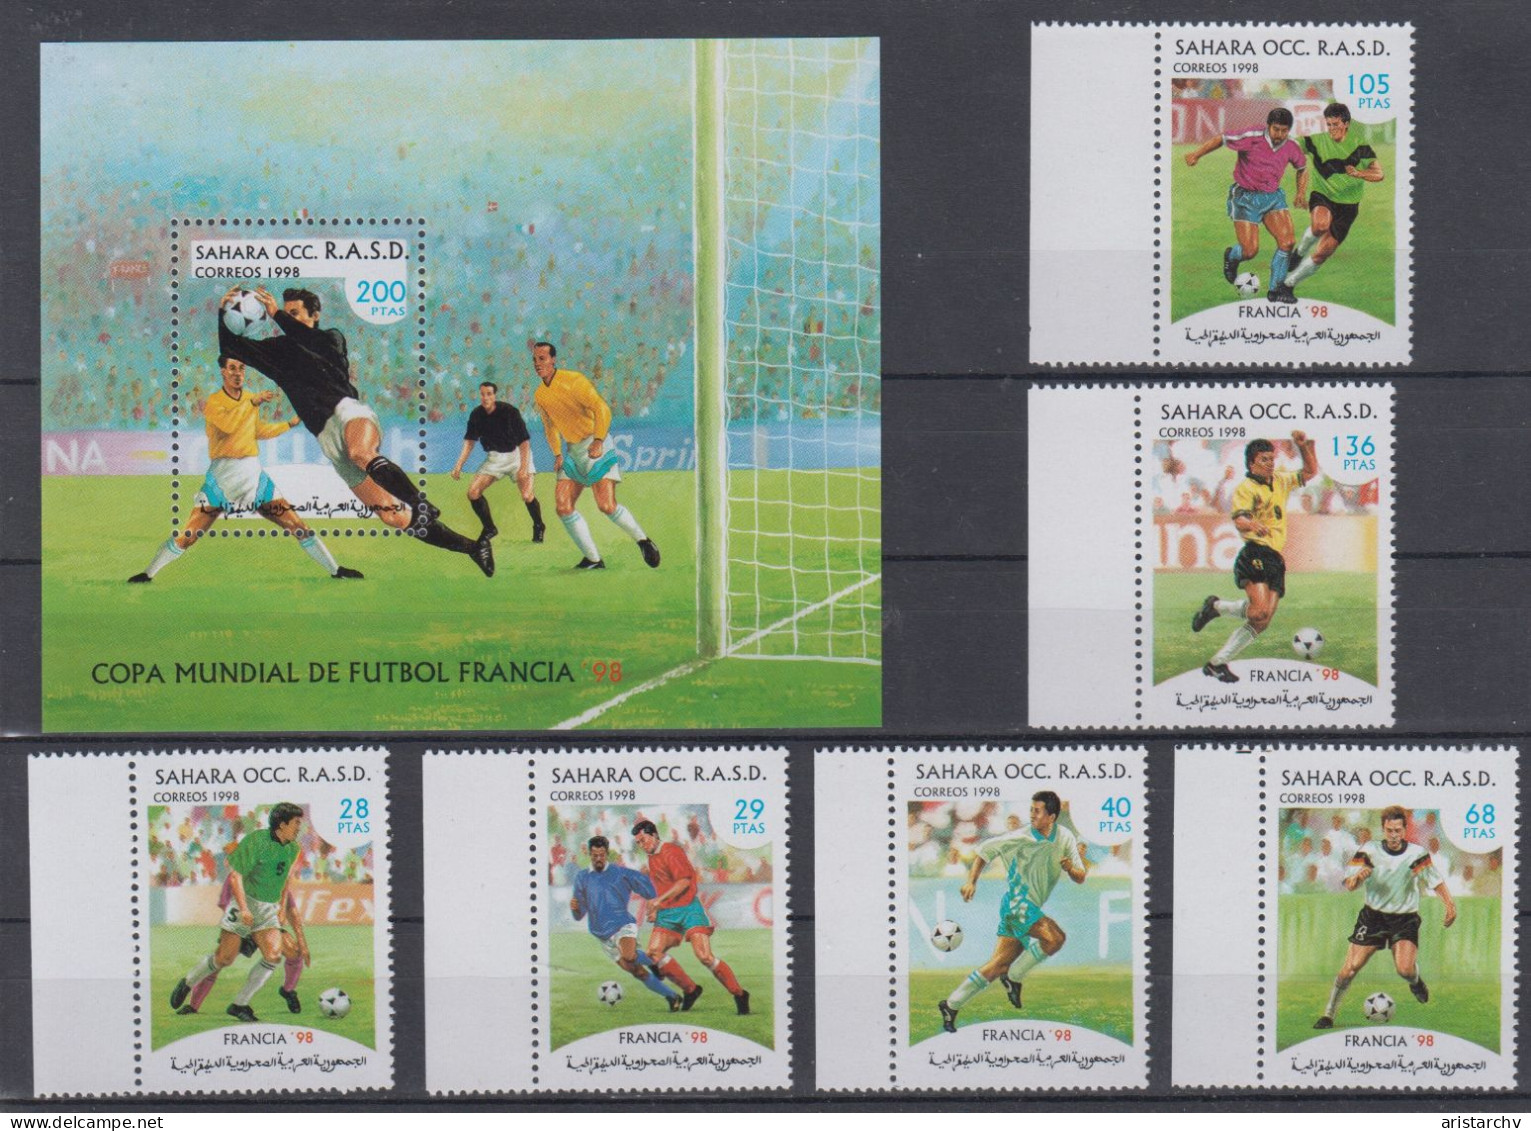 SAHARA OCC 1998 FOOTBALL WORLD CUP S/SHEET AND 6 STAMPS - 1998 – Frankreich